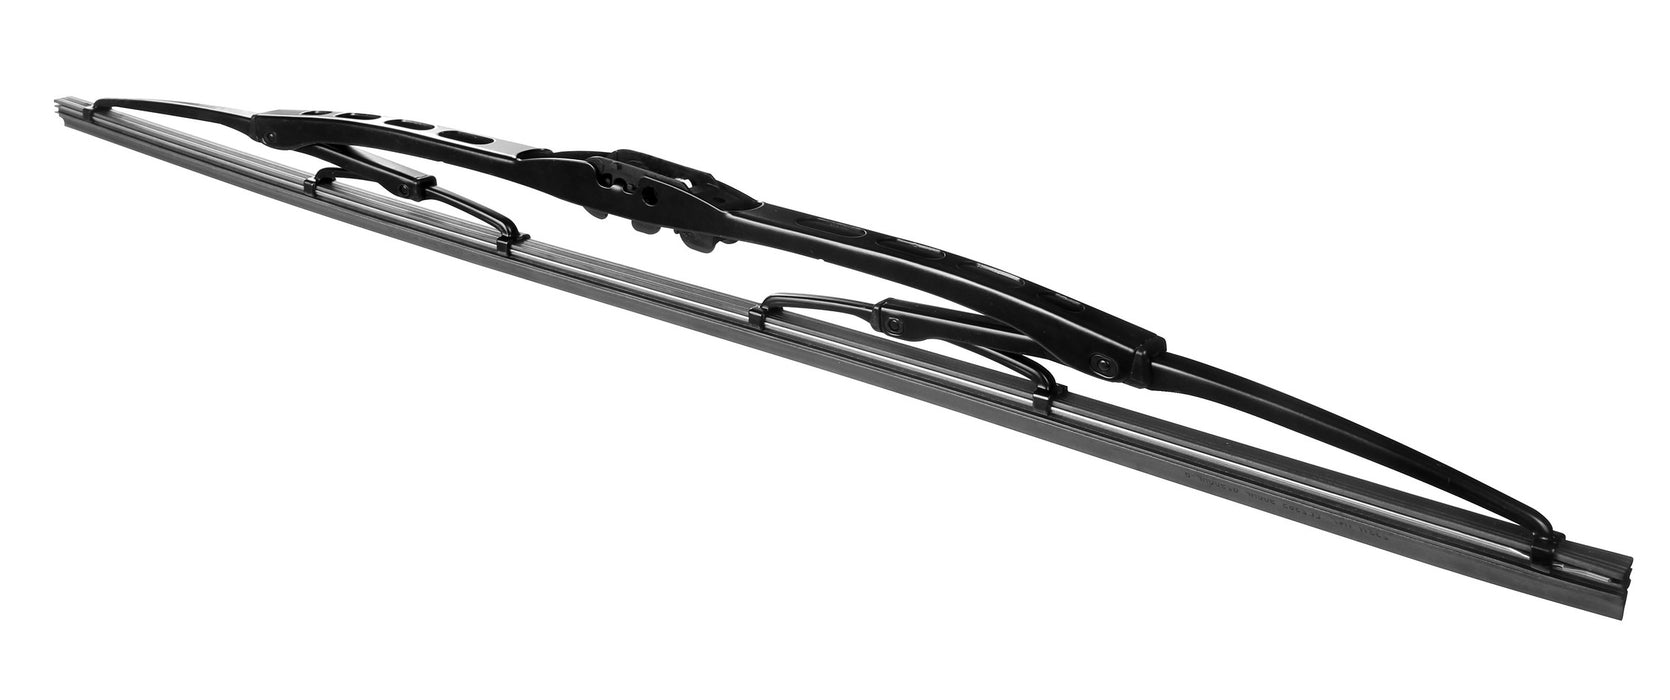 Volvo V50 2006-2016 Xtremeauto® Rear Window Windscreen Replacement Wiper Blades